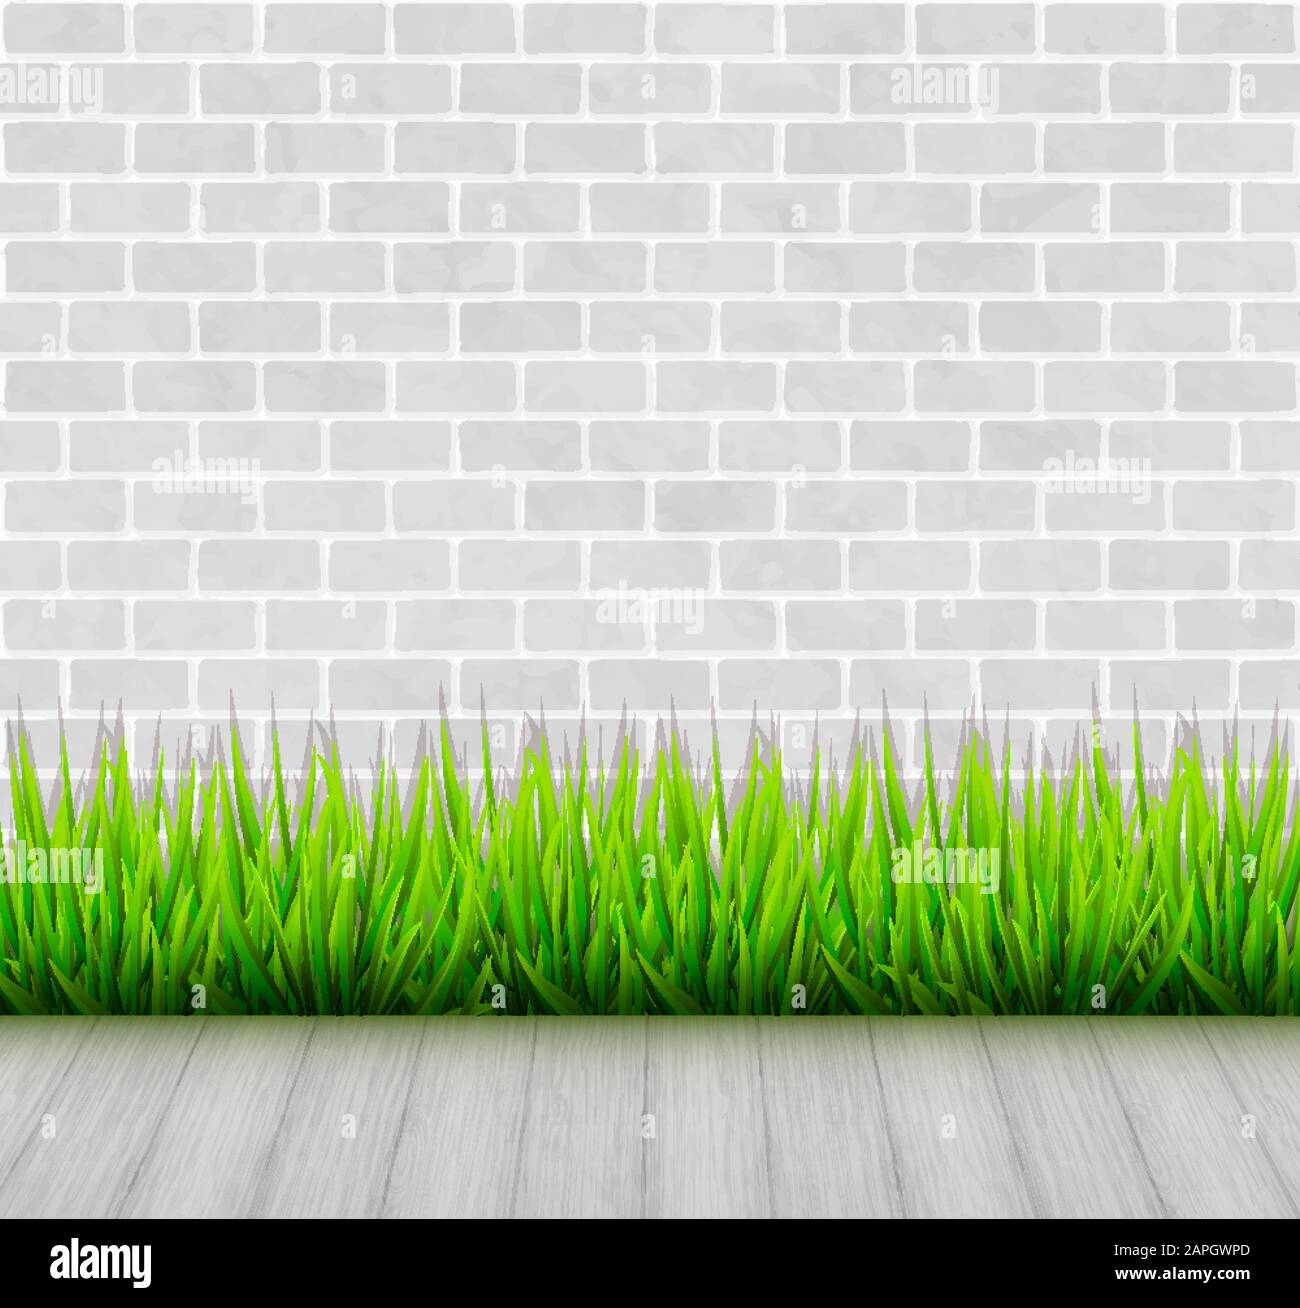 Brick wall with green grass and wooden floor vector background Stock Vector